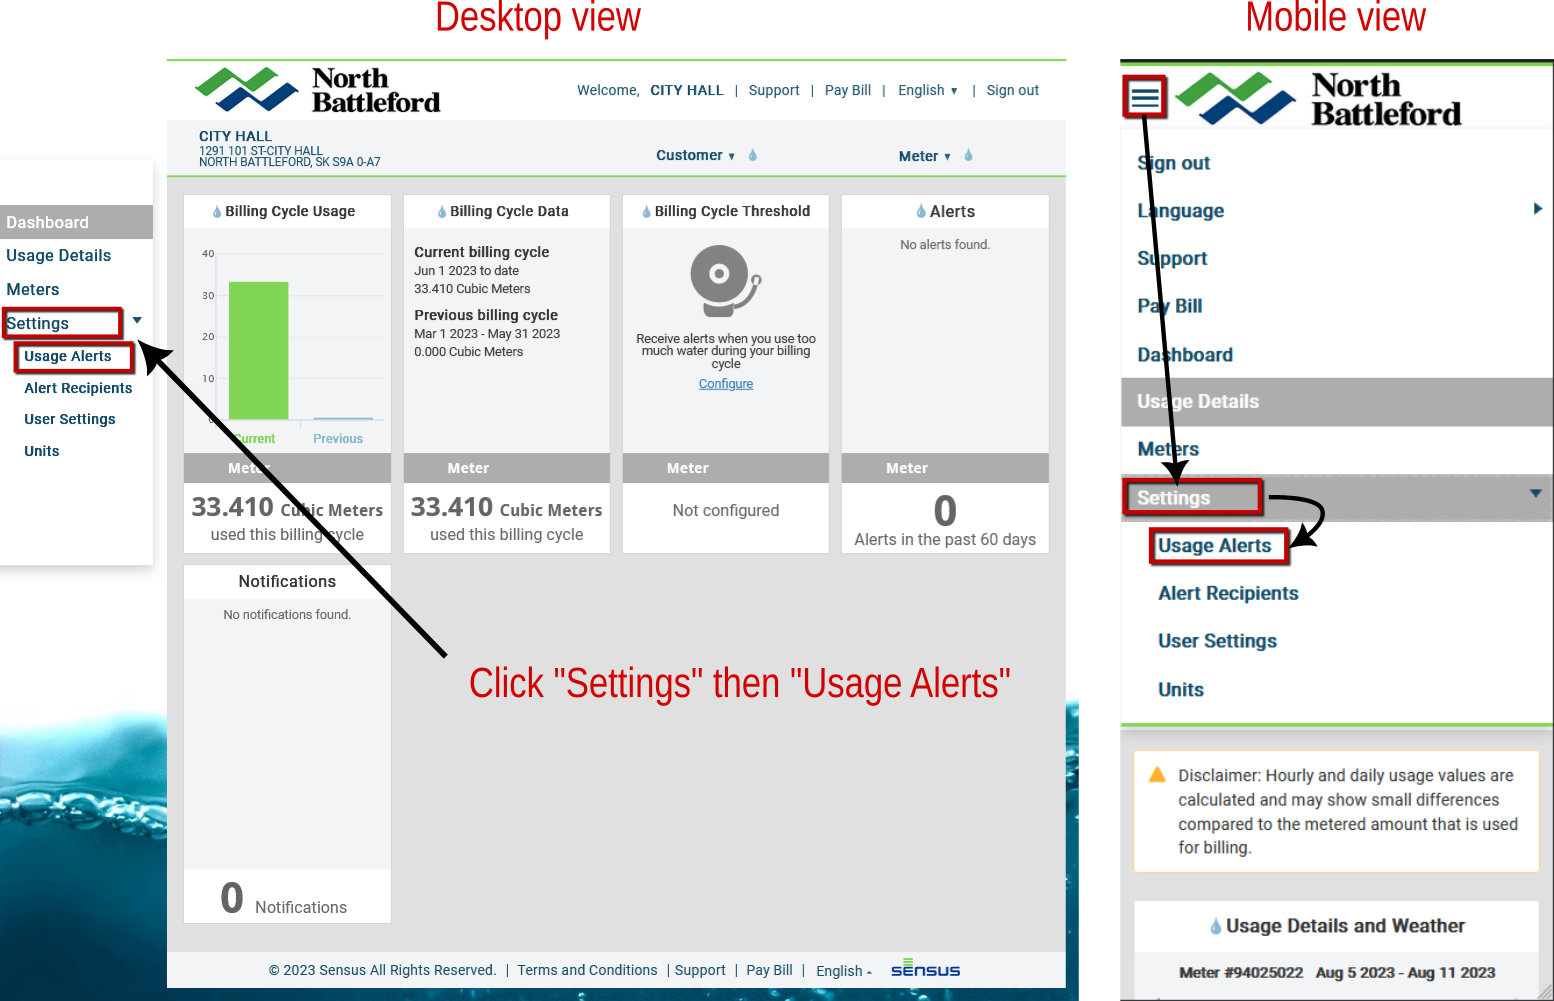 Screenshots of the desktop and mobile view showing where to click usage alerts